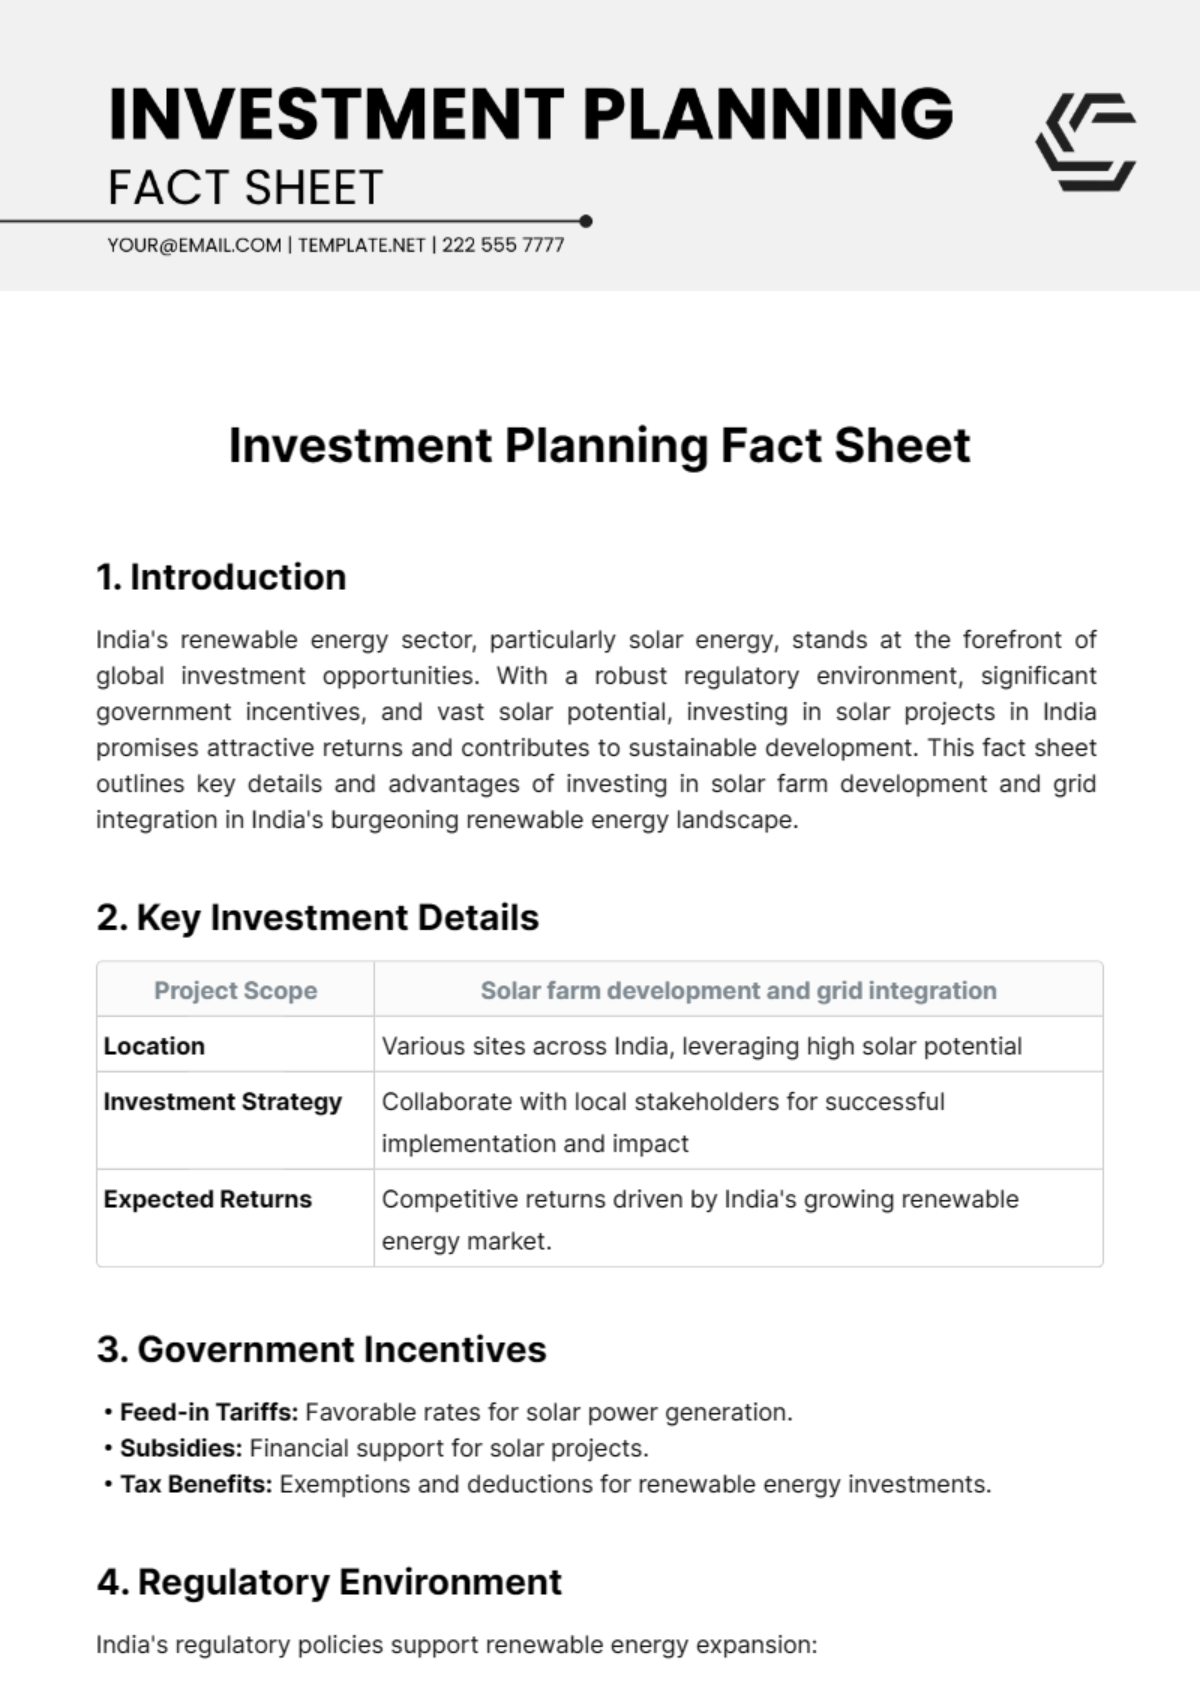 Investment Planning Fact Sheet Template